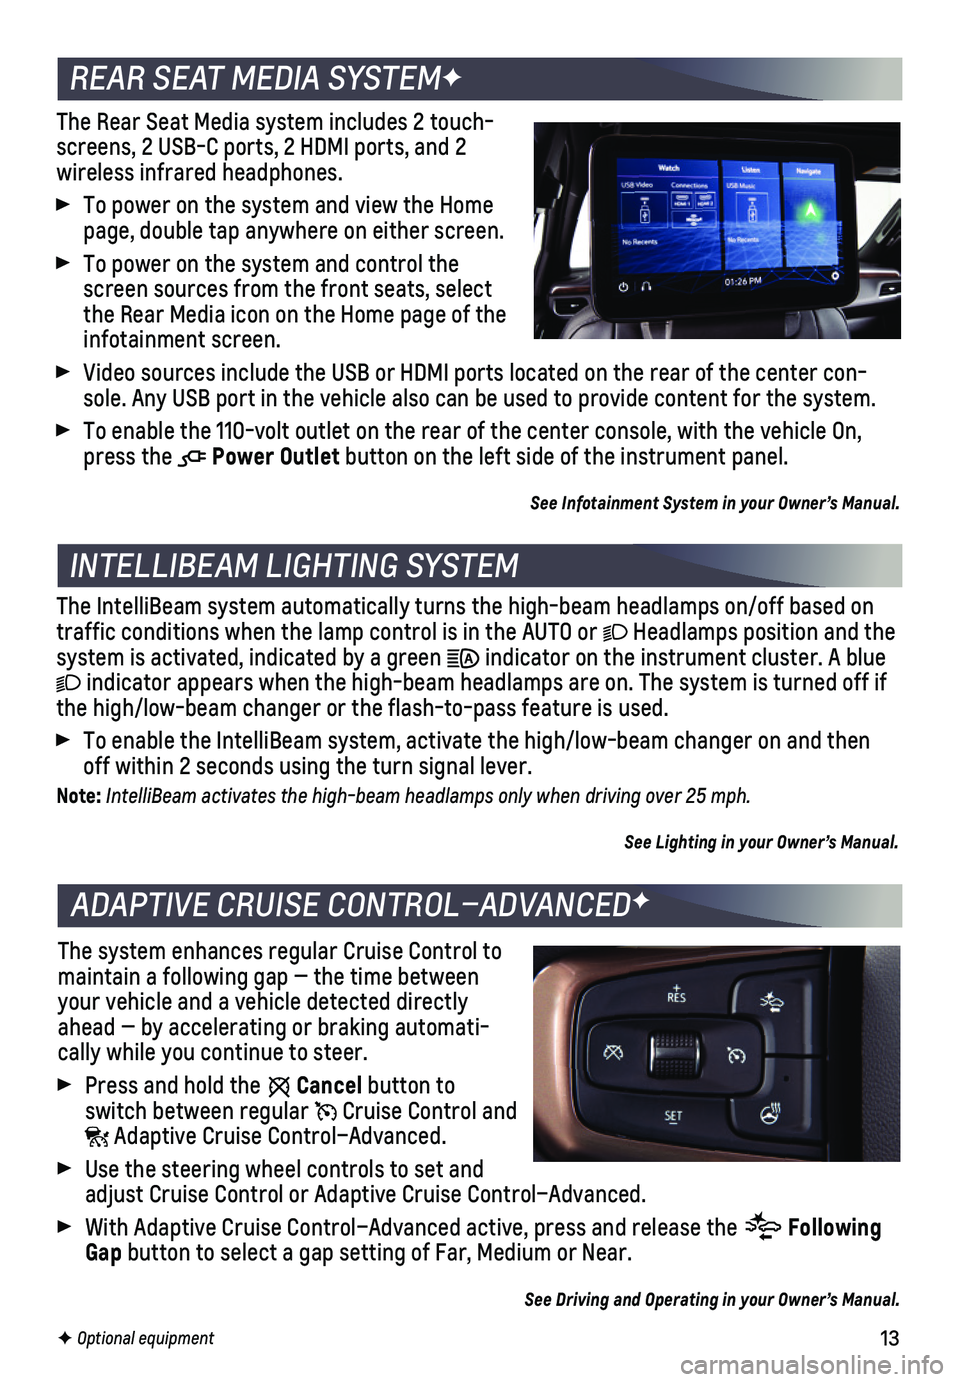 CHEVROLET SUBURBAN 2021  Get To Know Guide 13F Optional equipment  
The Rear Seat Media system includes 2 touch-screens, 2 USB-C ports, 2 HDMI ports, and 2  
wireless infrared headphones.
 To power on the system and view the Home page, double 